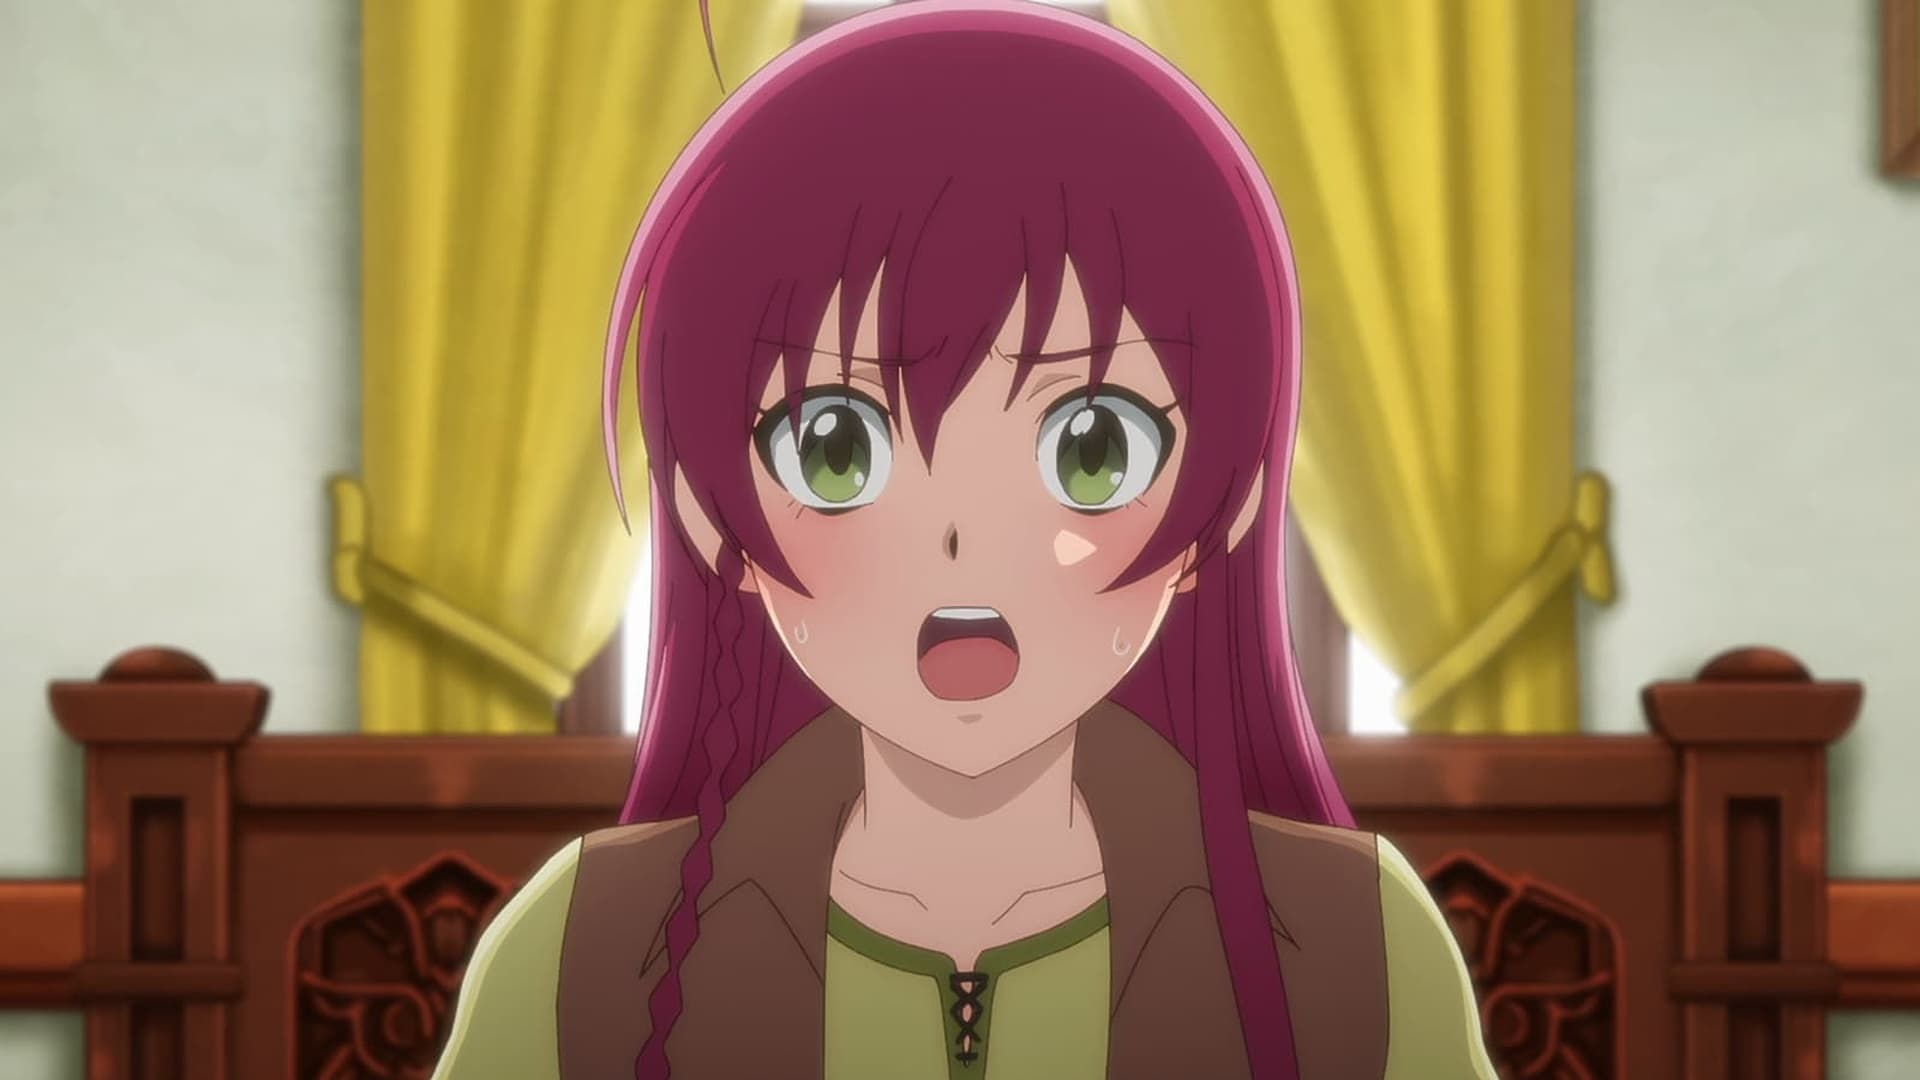 Watch The Devil Is a Part-Timer! season 2 episode 3 streaming online